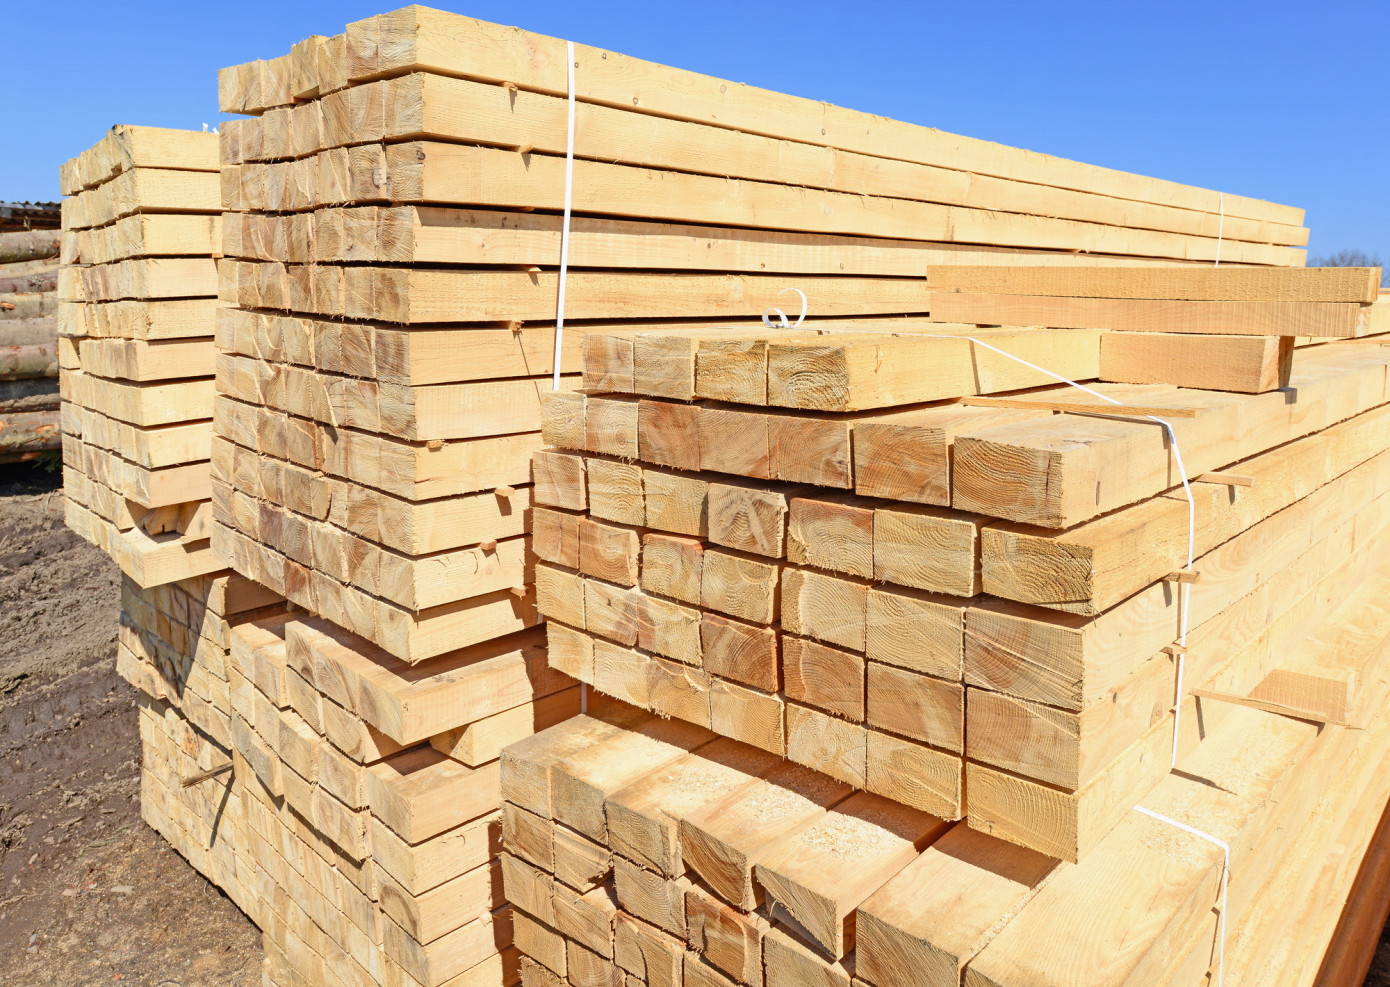 China decreases softwood lumber imports by 25% in May